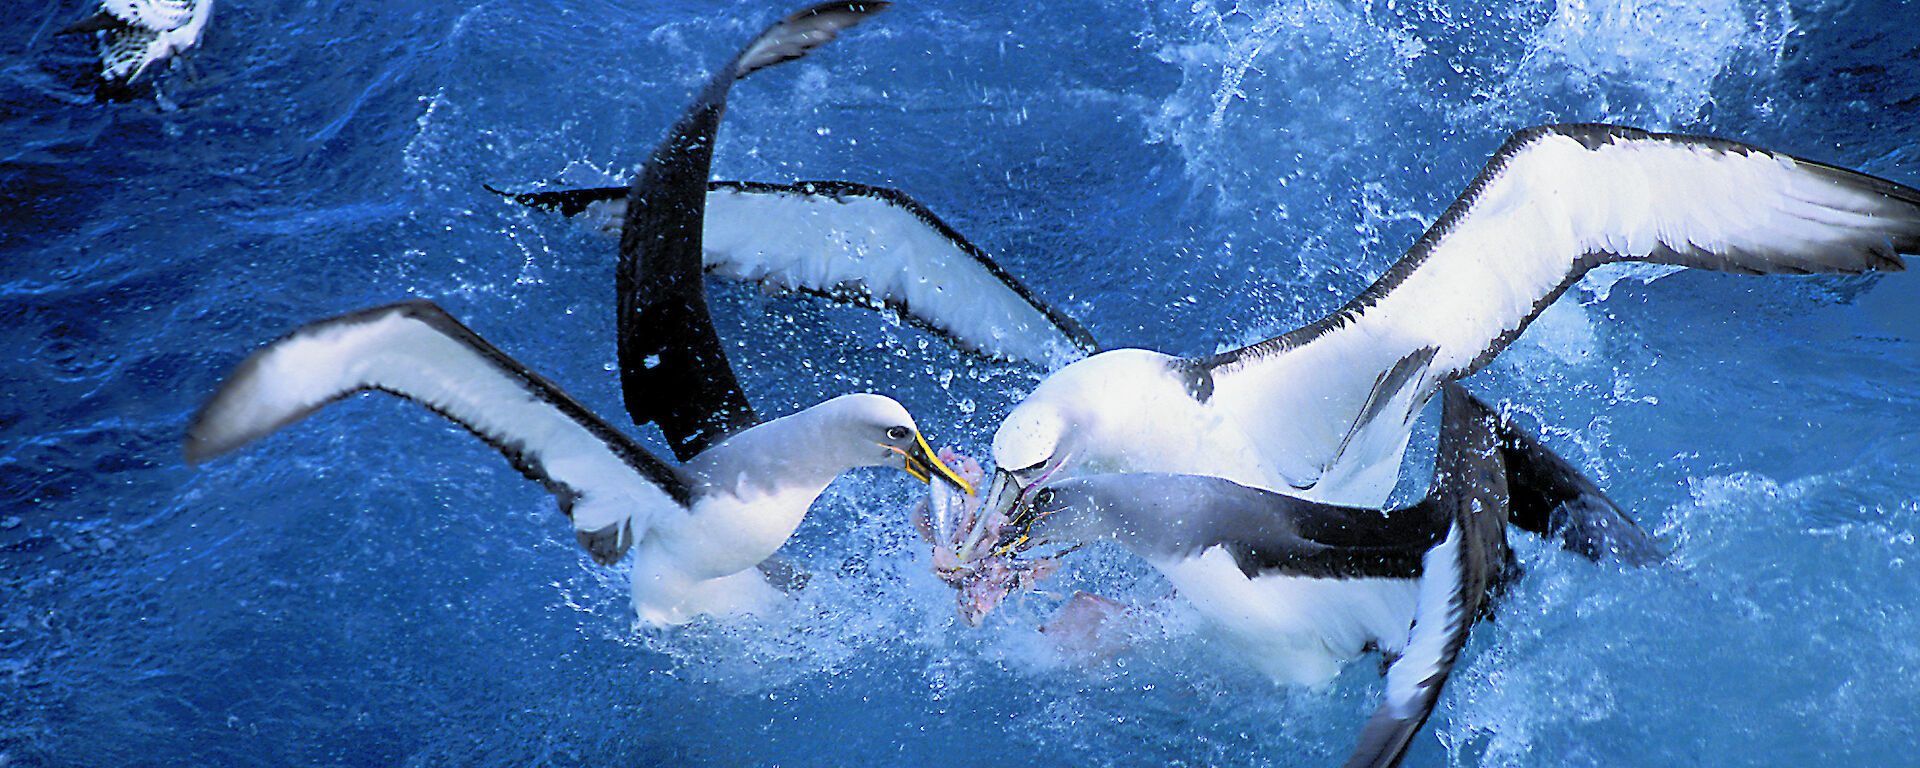 Several albatrosses in the water, fighting over fish